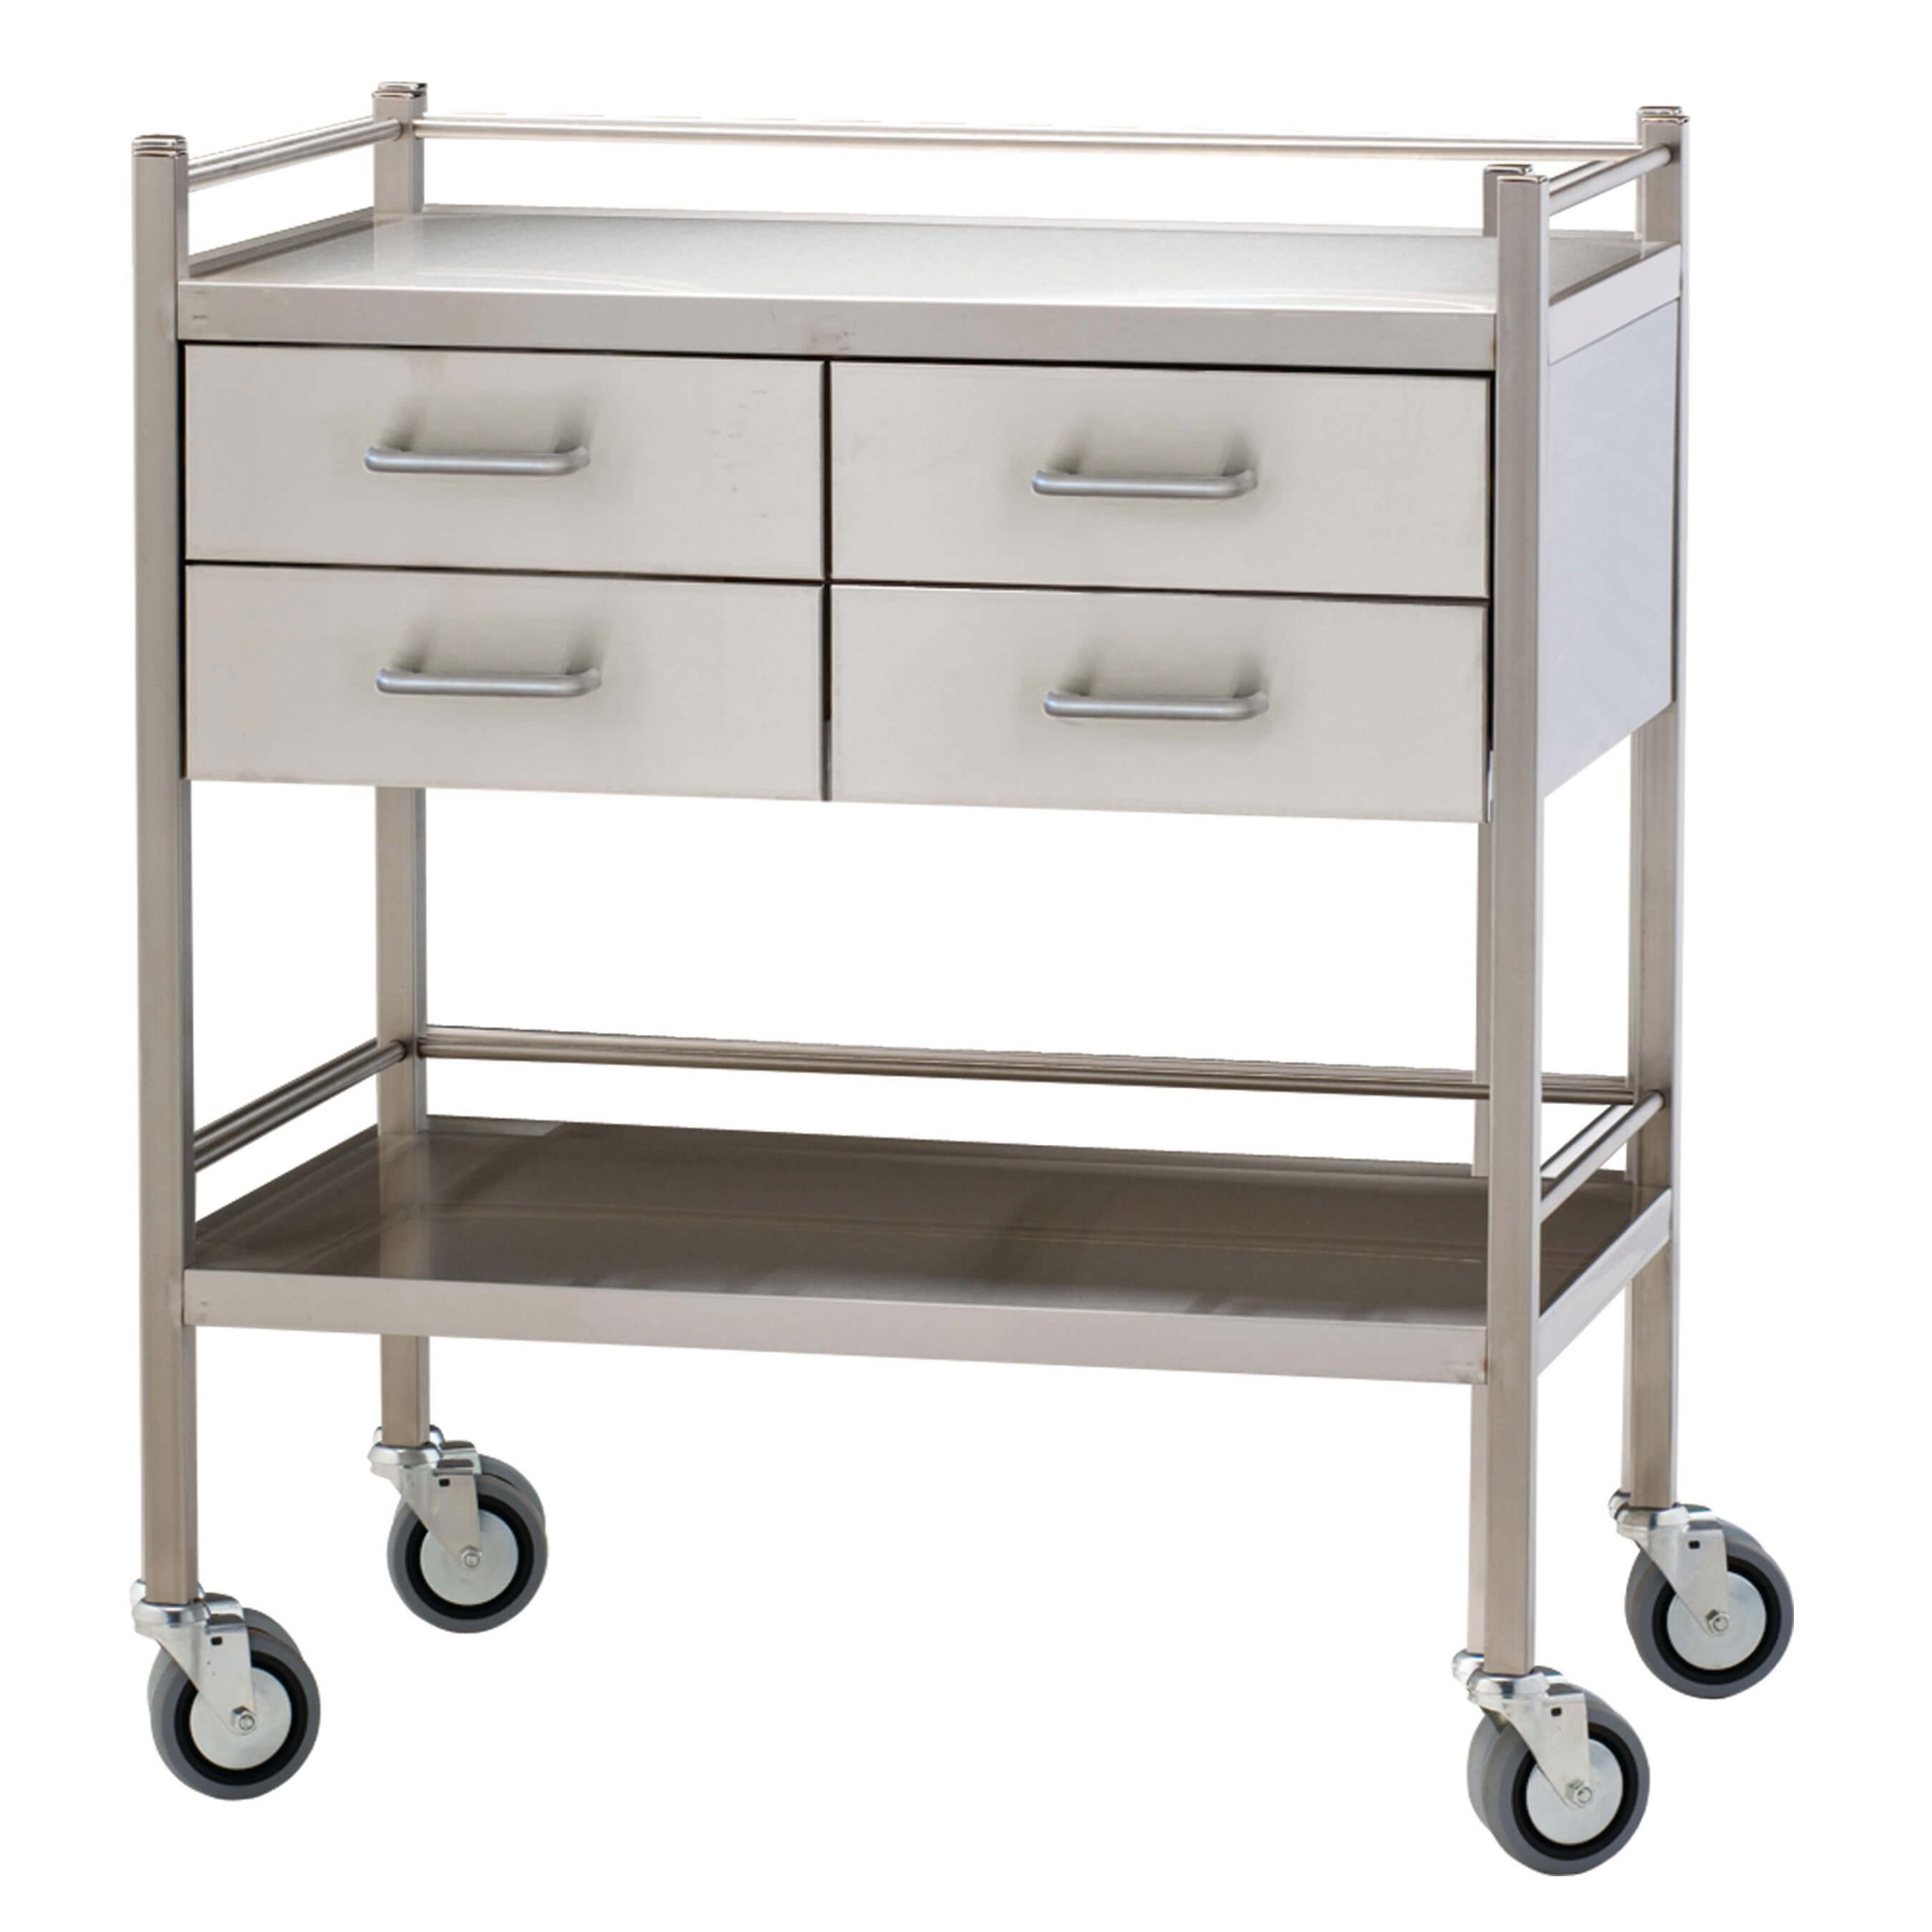 Hospital General Equipment Manufacturers, Suppliers, Dealers & Prices